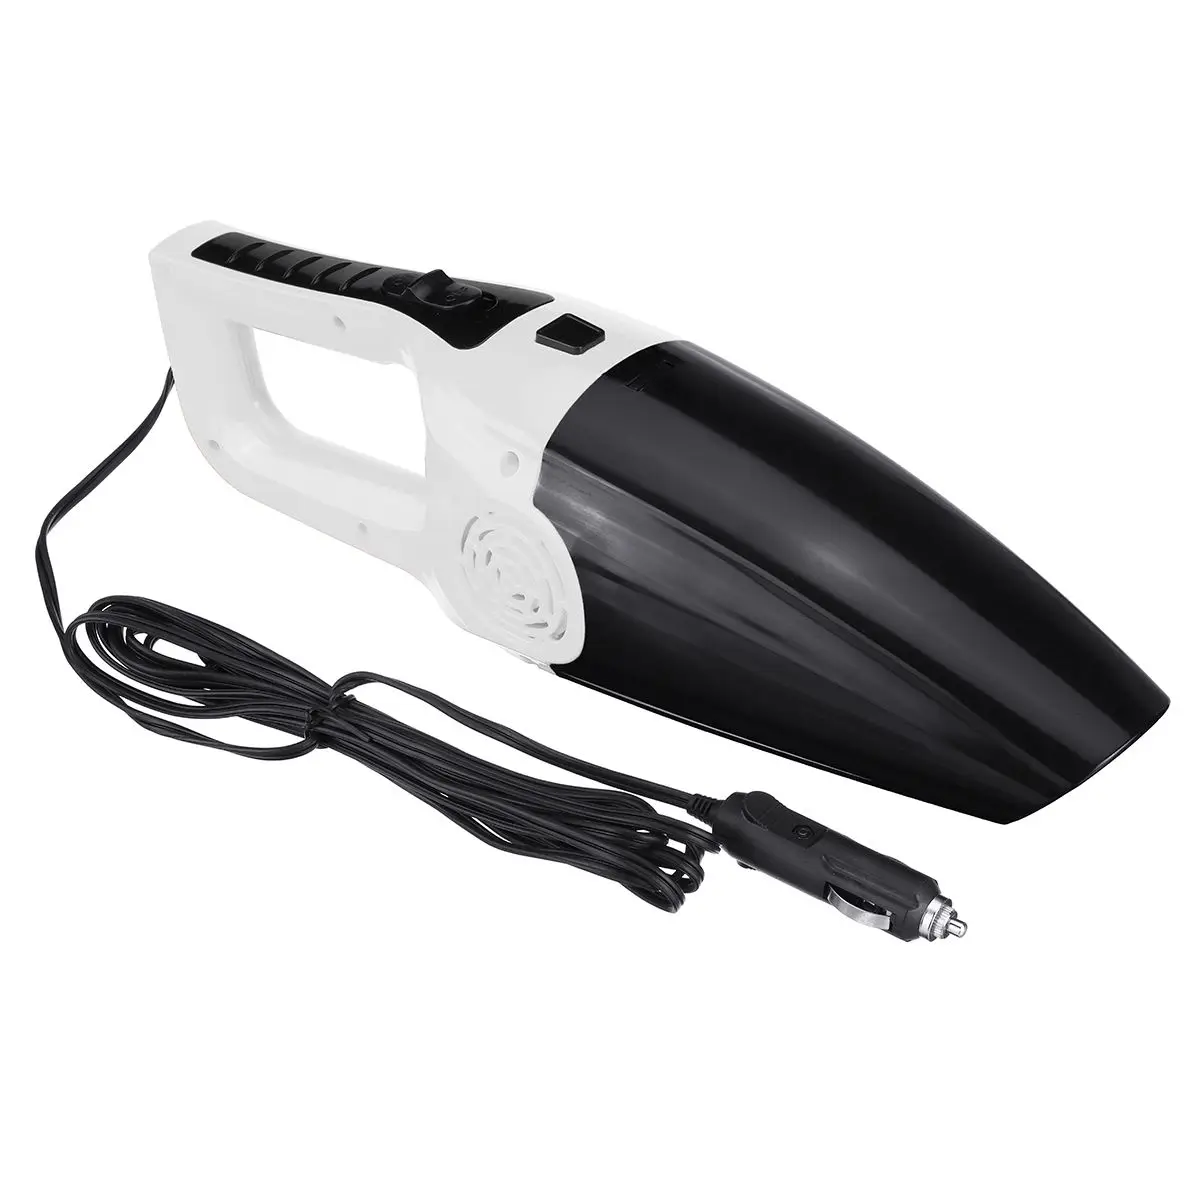 

8000Pa Strong Suction Car Vacuum Cleaner 120W 12V Portable Handheld Car Plug Wired Wet/Dry Vaccum Cleaners for Car Home Pet Hair